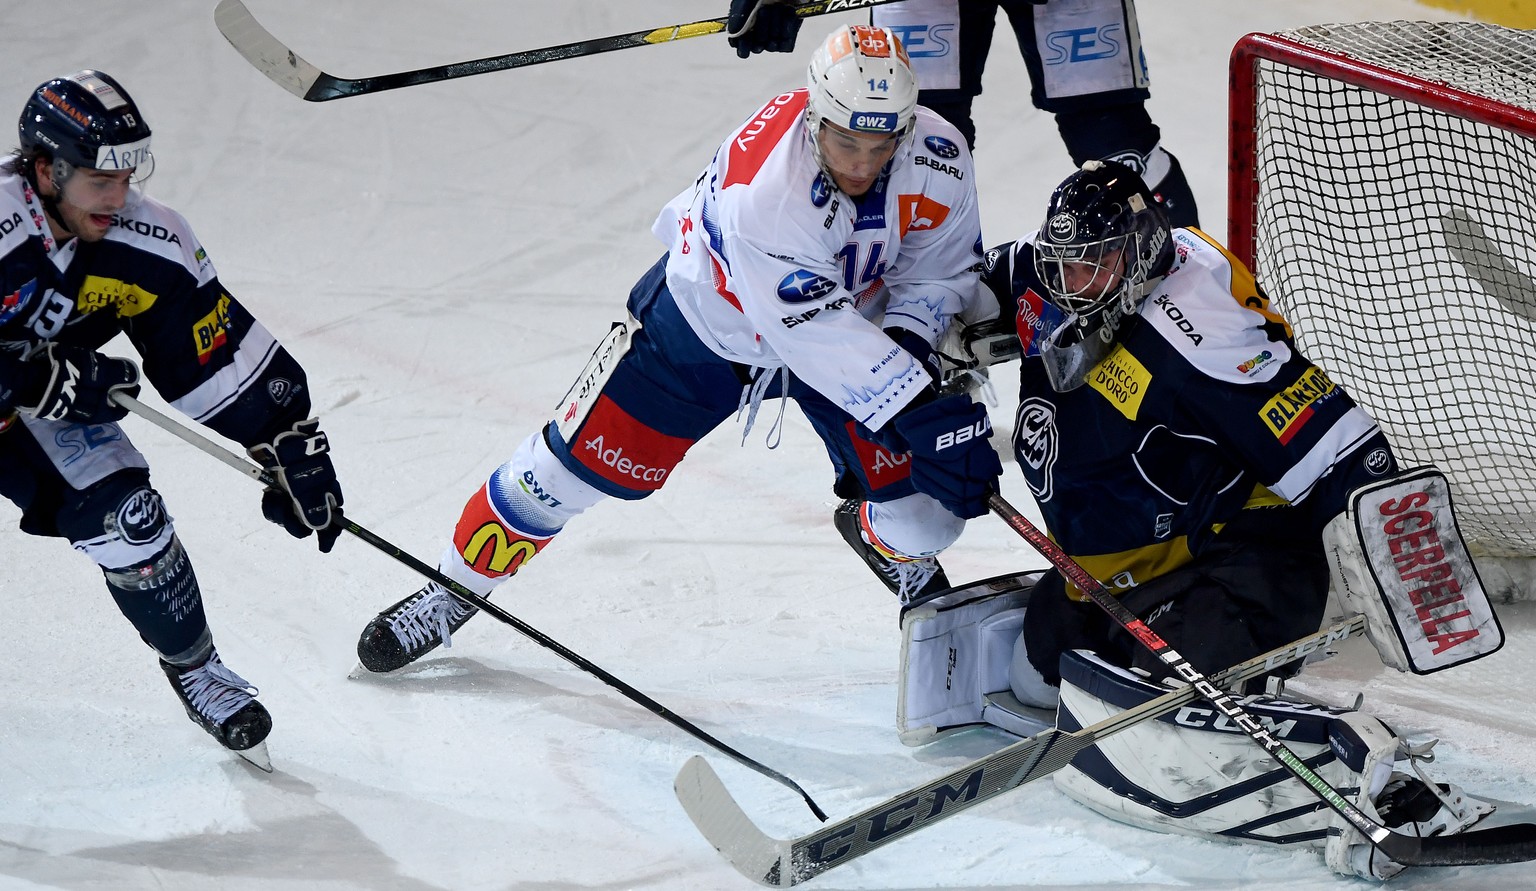 From left Ambri&#039;s player Marco Müller, Zsc&#039;player Chris Baltisberger and Ambri&#039;s goalkeeper Benjamin Conz, during the preliminary round game of National League A (NLA) Swiss Championshi ...